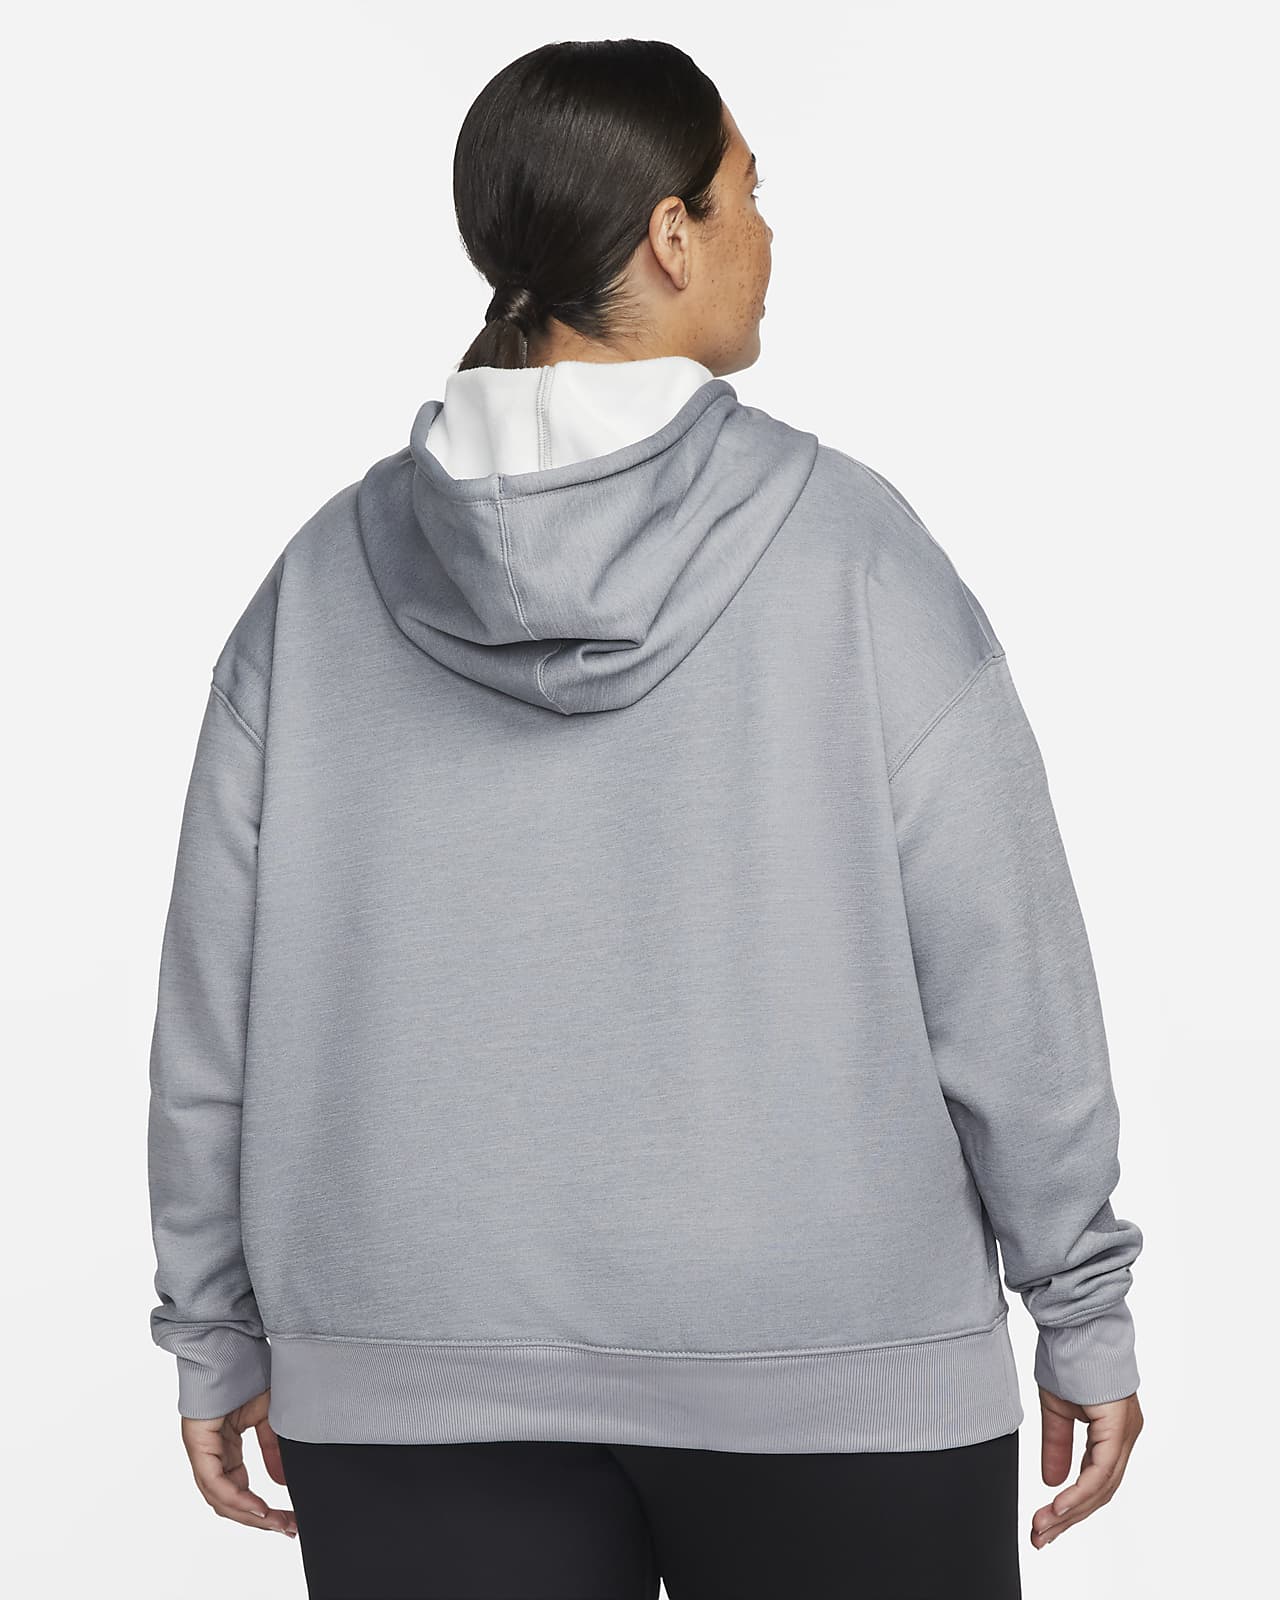 Nike Therma-FIT All Time Women's Training Hoodie (Plus Size). Nike